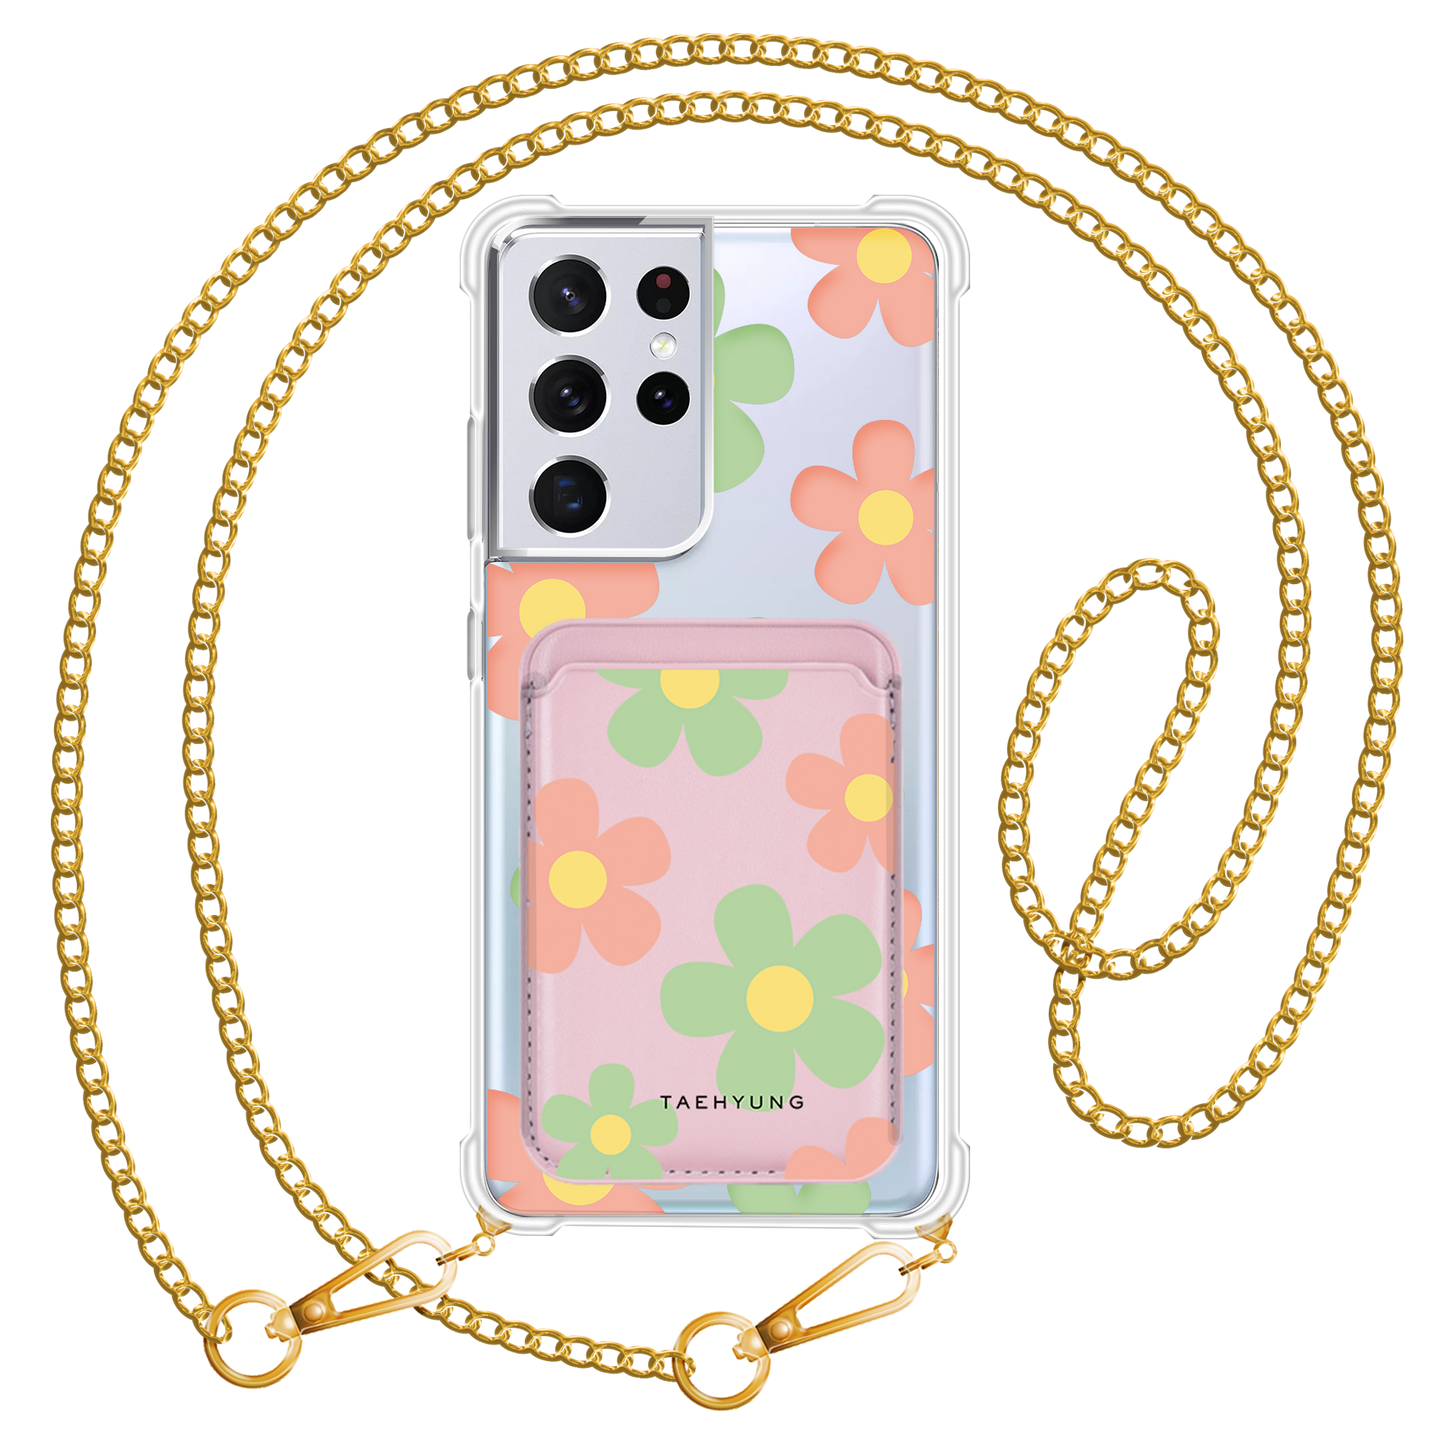 Android Magnetic Wallet Case - Daisy Spring